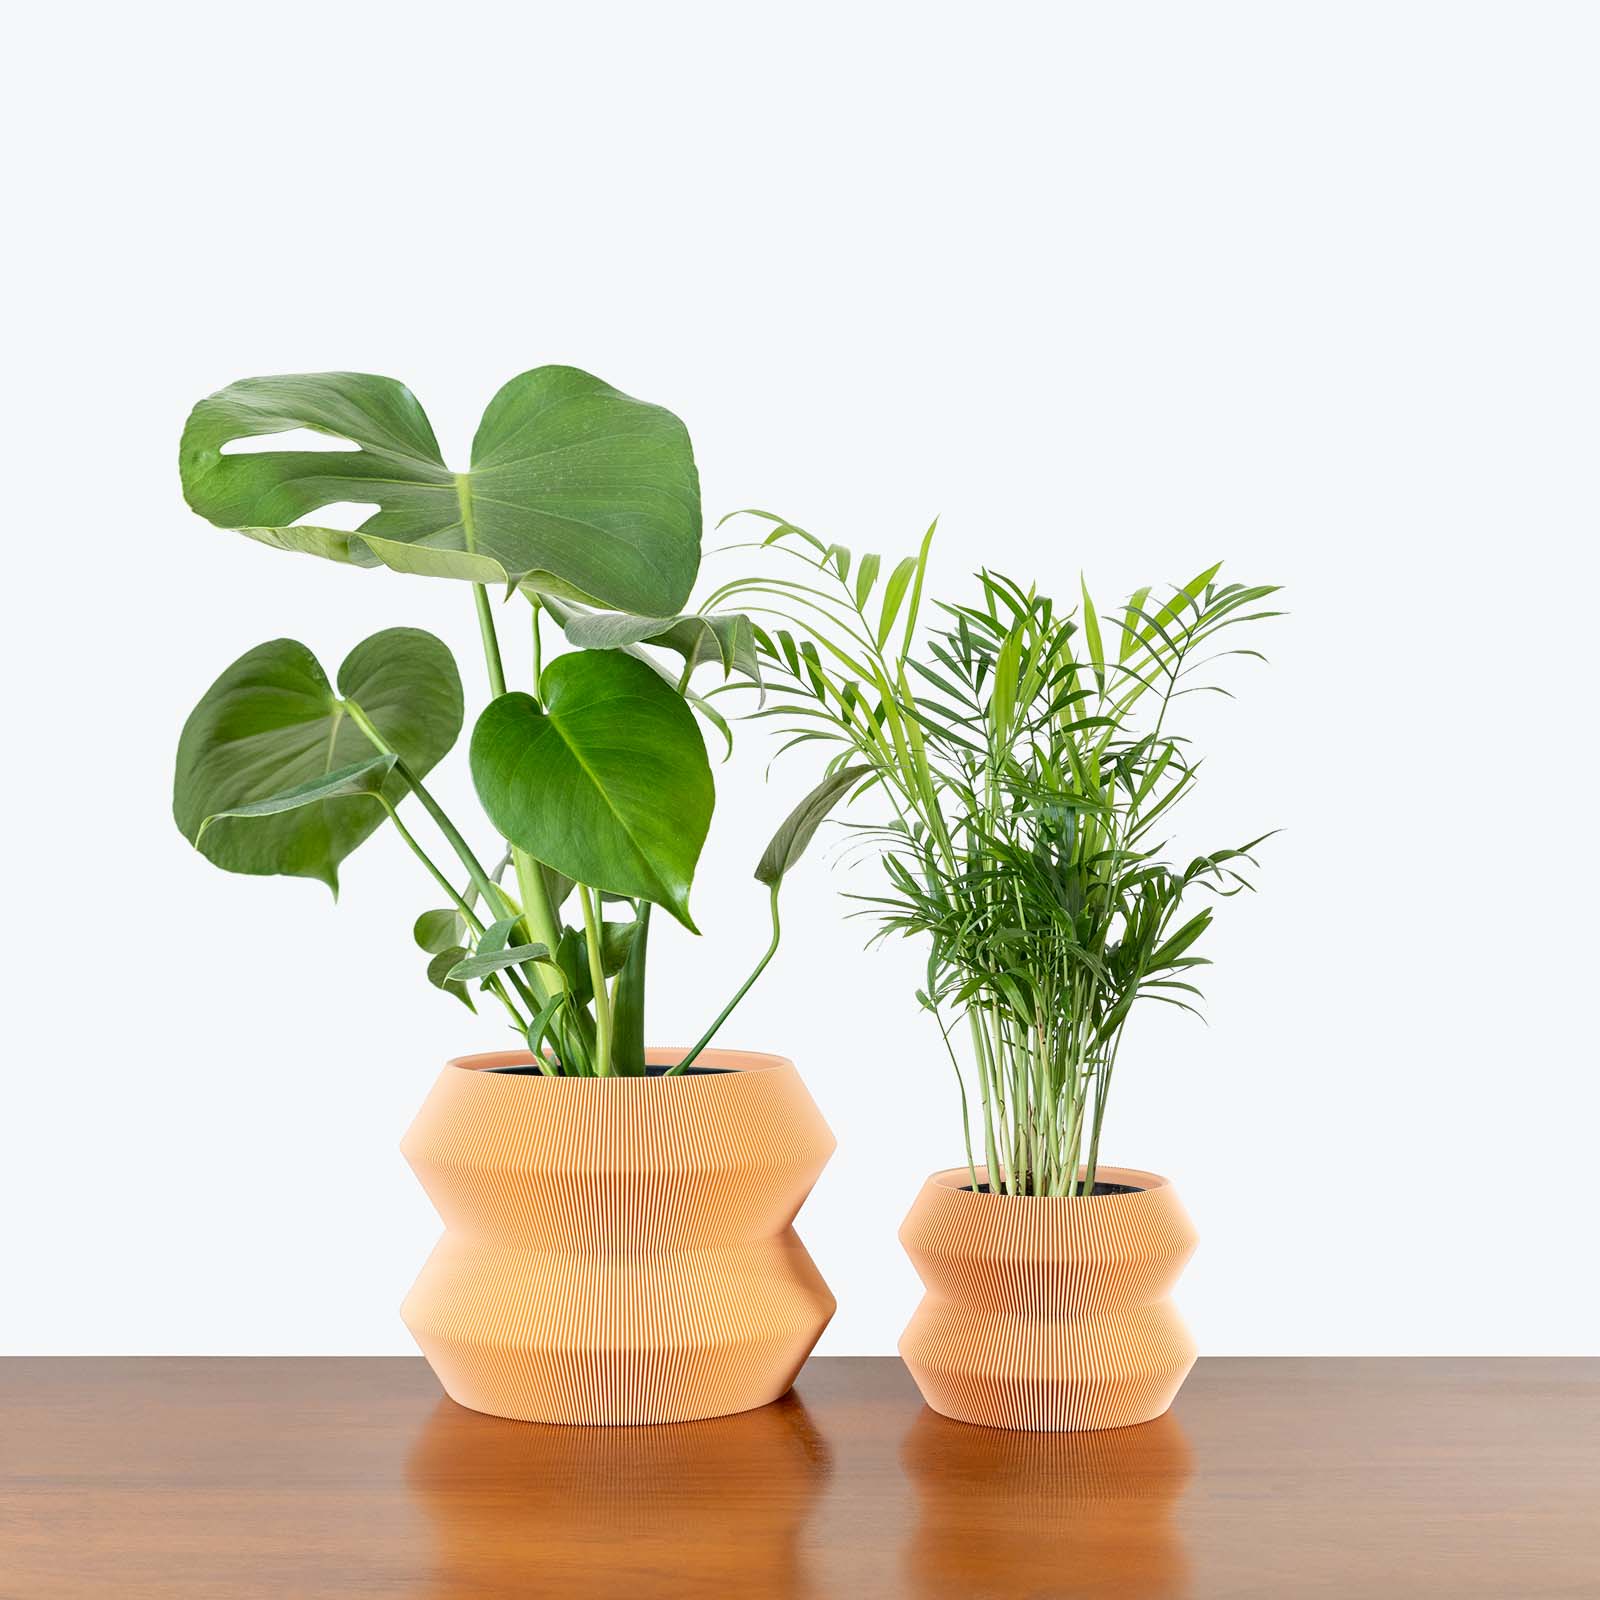 Best Selling Duo in 3D Printed Eco Friendly Geo Peach Planter - House Plants Delivery Toronto - JOMO Studio #planter_geo planter